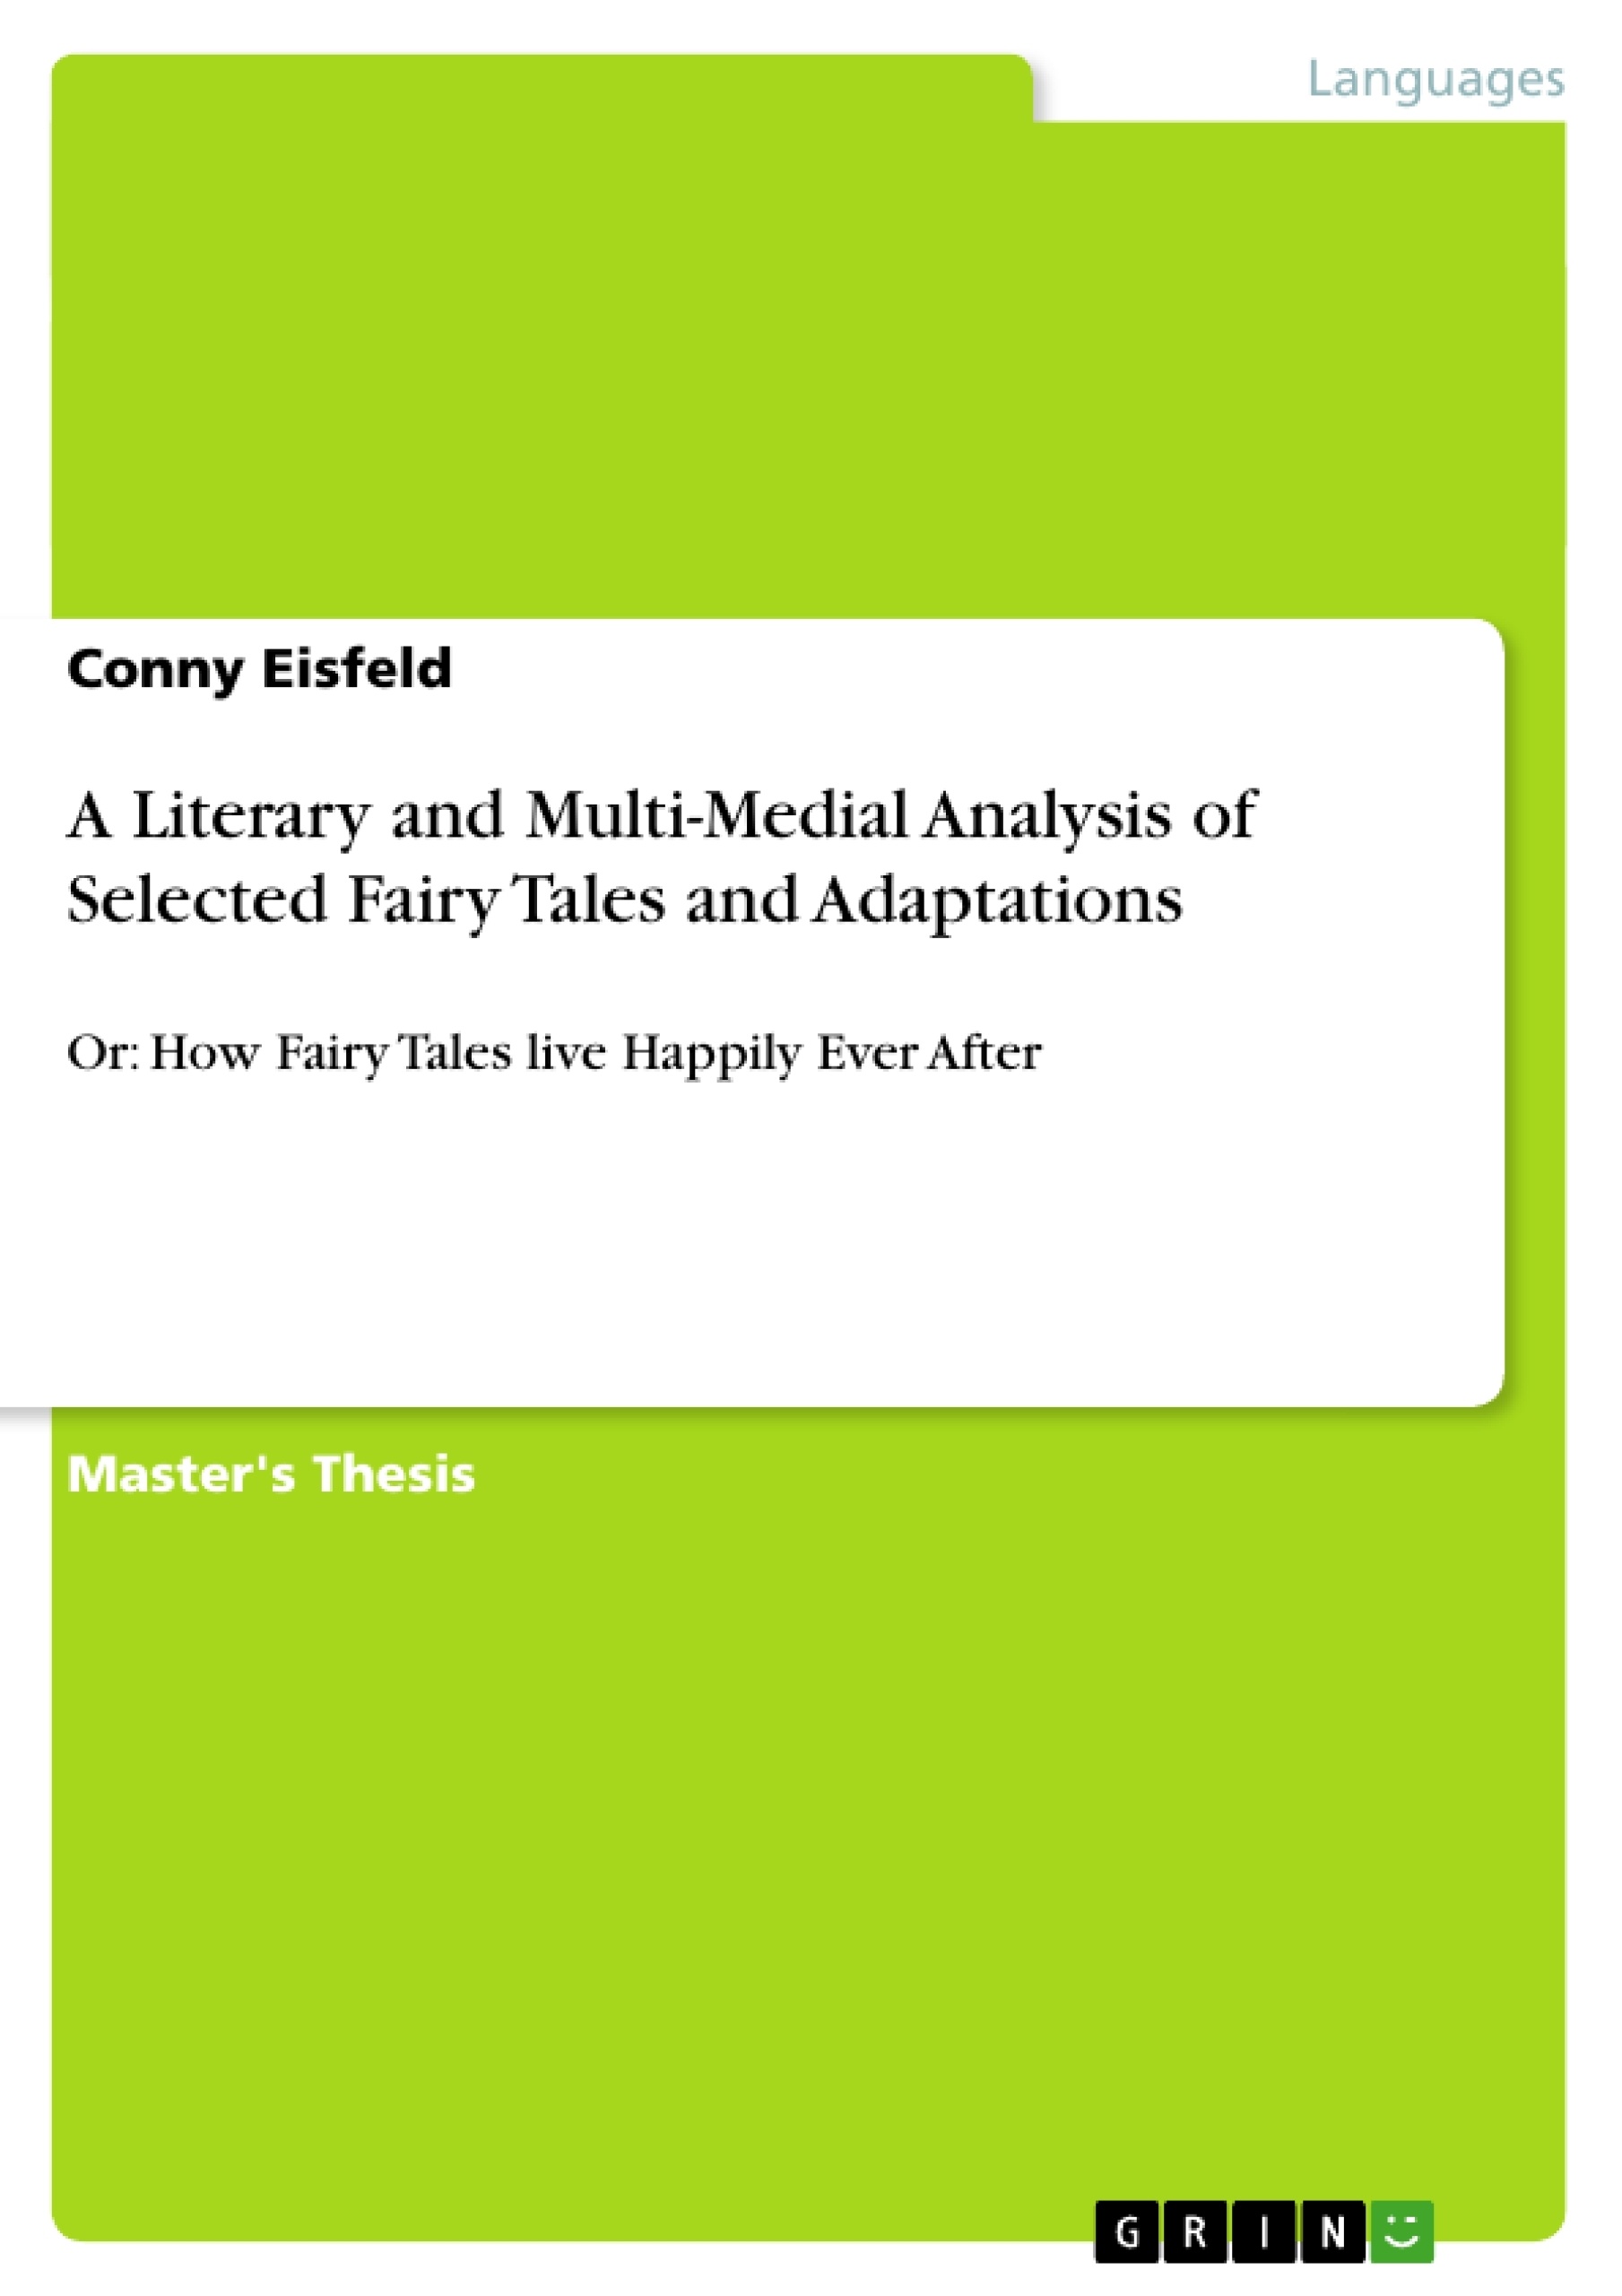 Titre: A Literary and Multi-Medial Analysis of Selected Fairy Tales and Adaptations